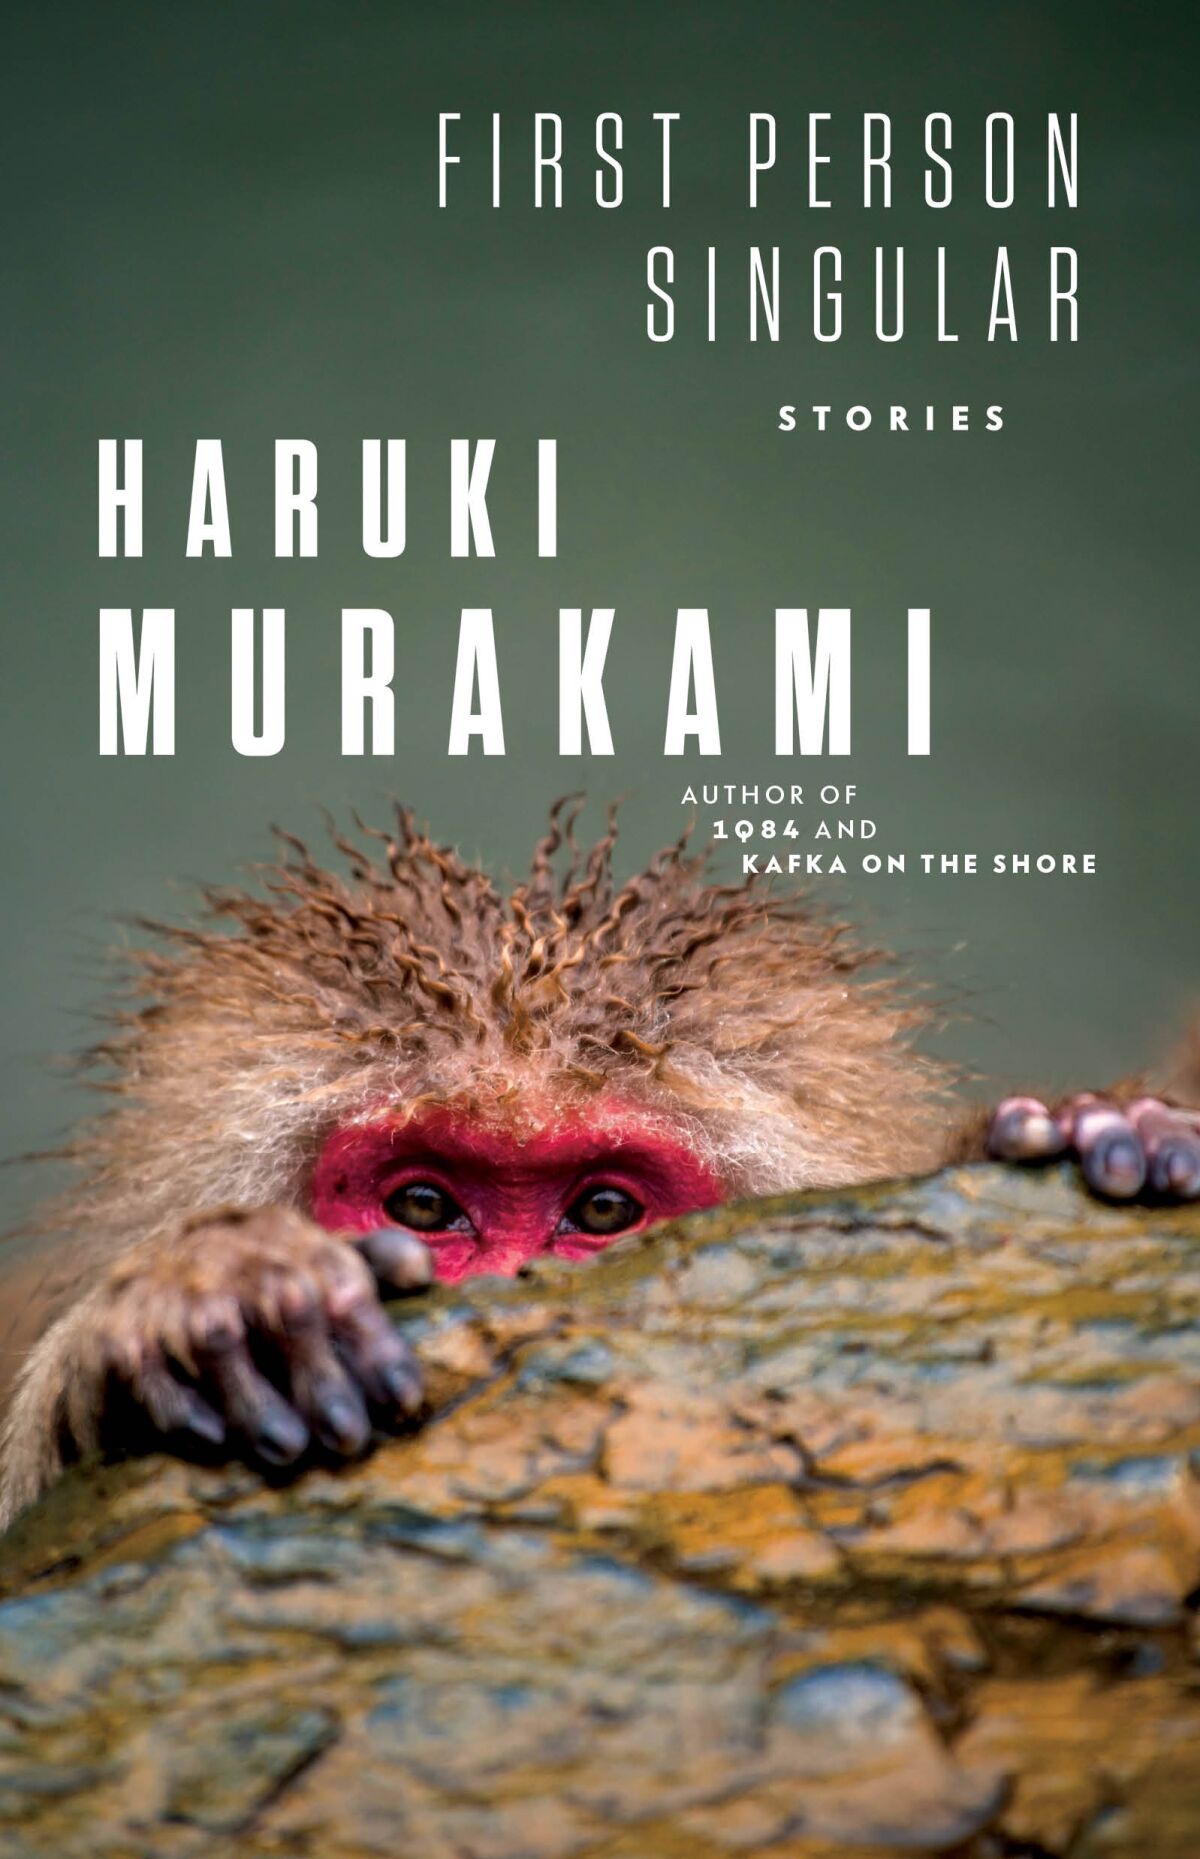 The cover of Haruki Murakami's "First Person Singular" features a monkey.